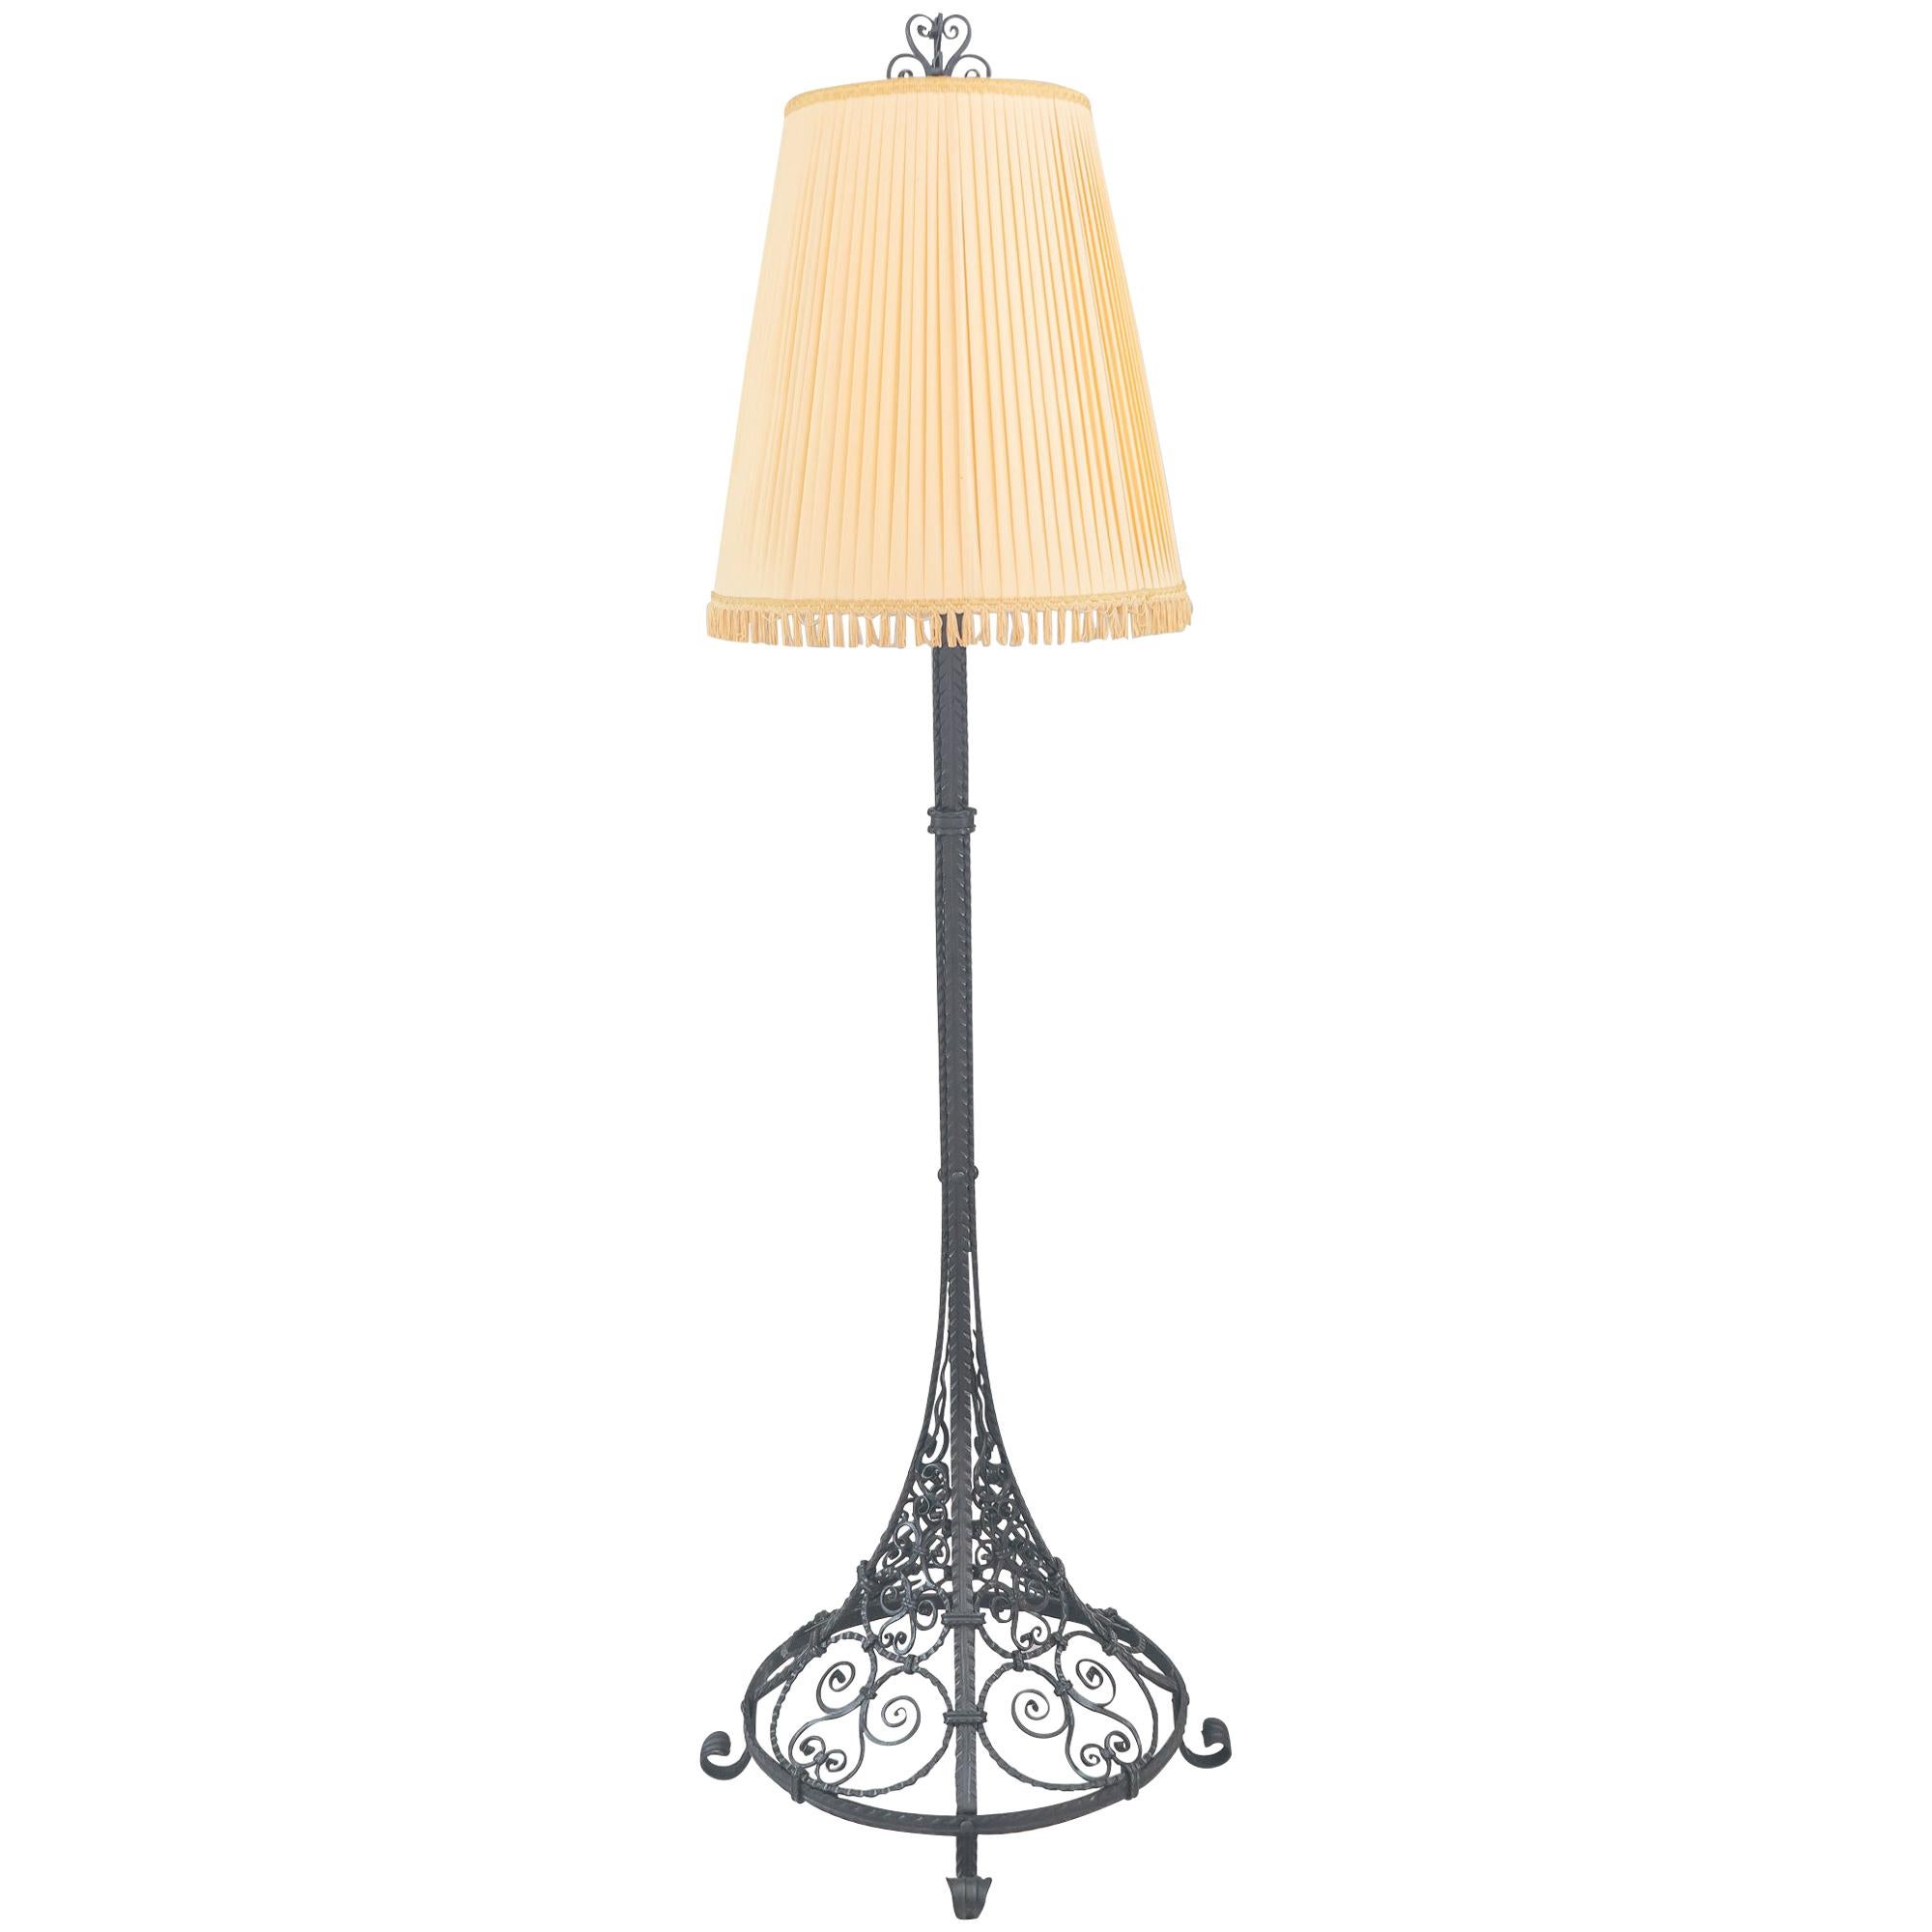 Floor Lamp Vienna circa 1930s Wrought Iron 'Painted' with Original Shade For Sale